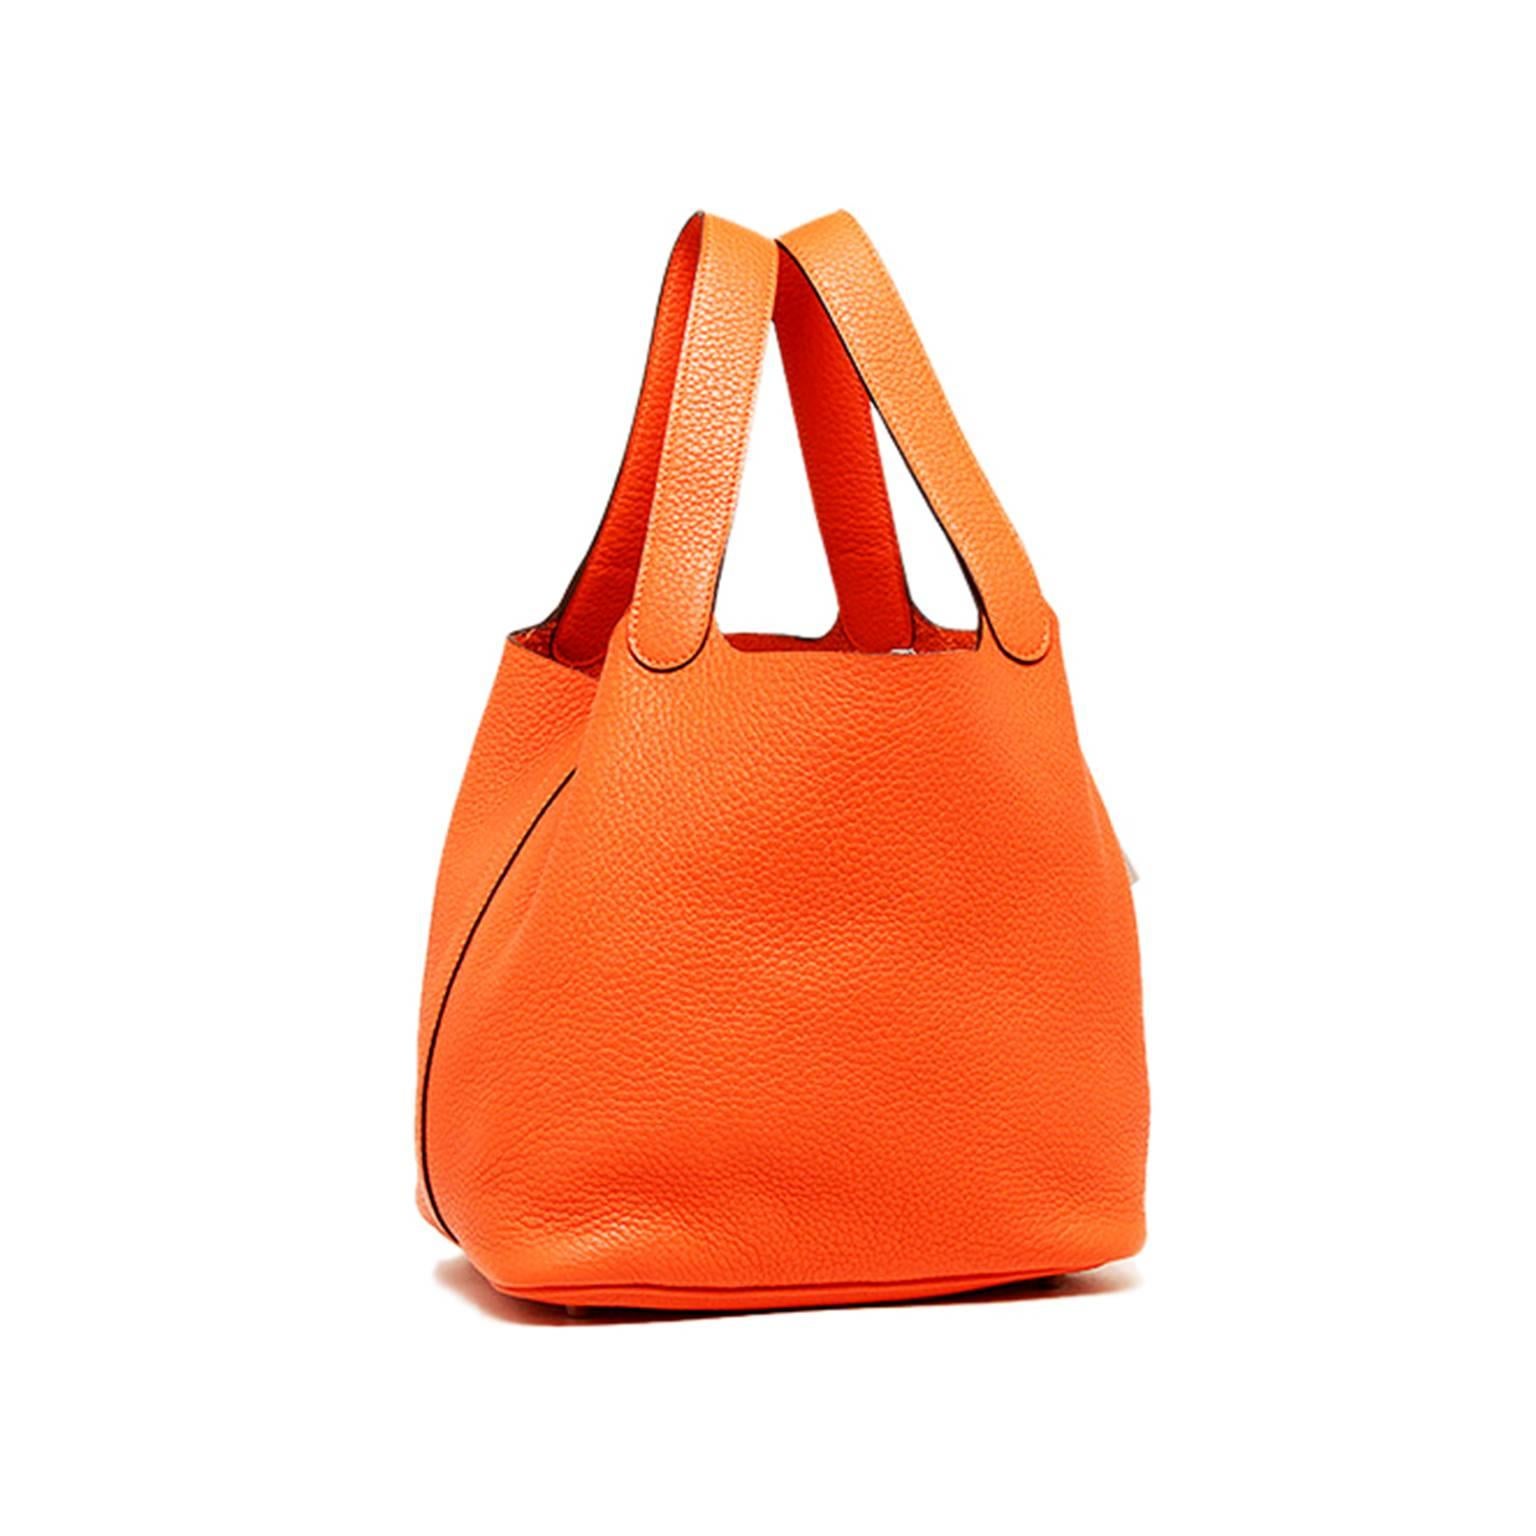 This contemporary Hermes Picotin Mini is a must have to many known Celebrities. With the classic Hermes orange coloration and Clemence Leather, it is a vibrant statement piece and a soft smooth touch to the hand. It is complete with a buckle strap